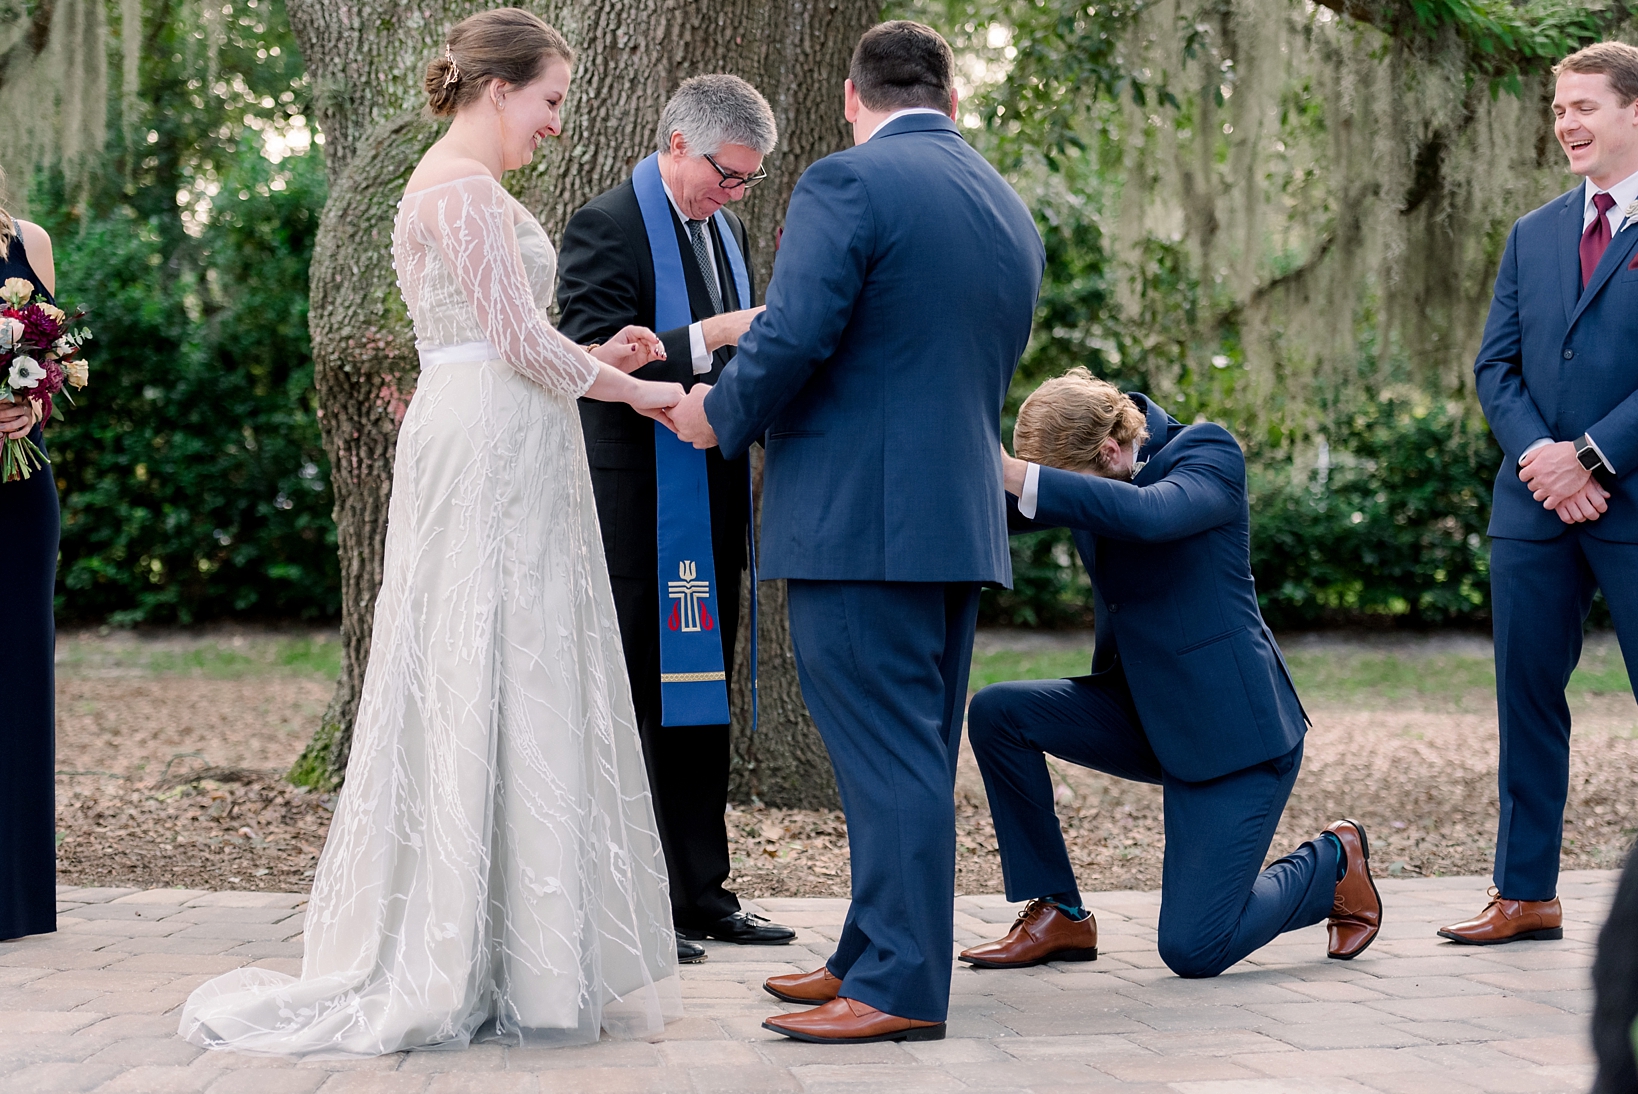 The best man knees as he hands the rings to the officiant at Bowing Oaks by Sarah & Ben Photography